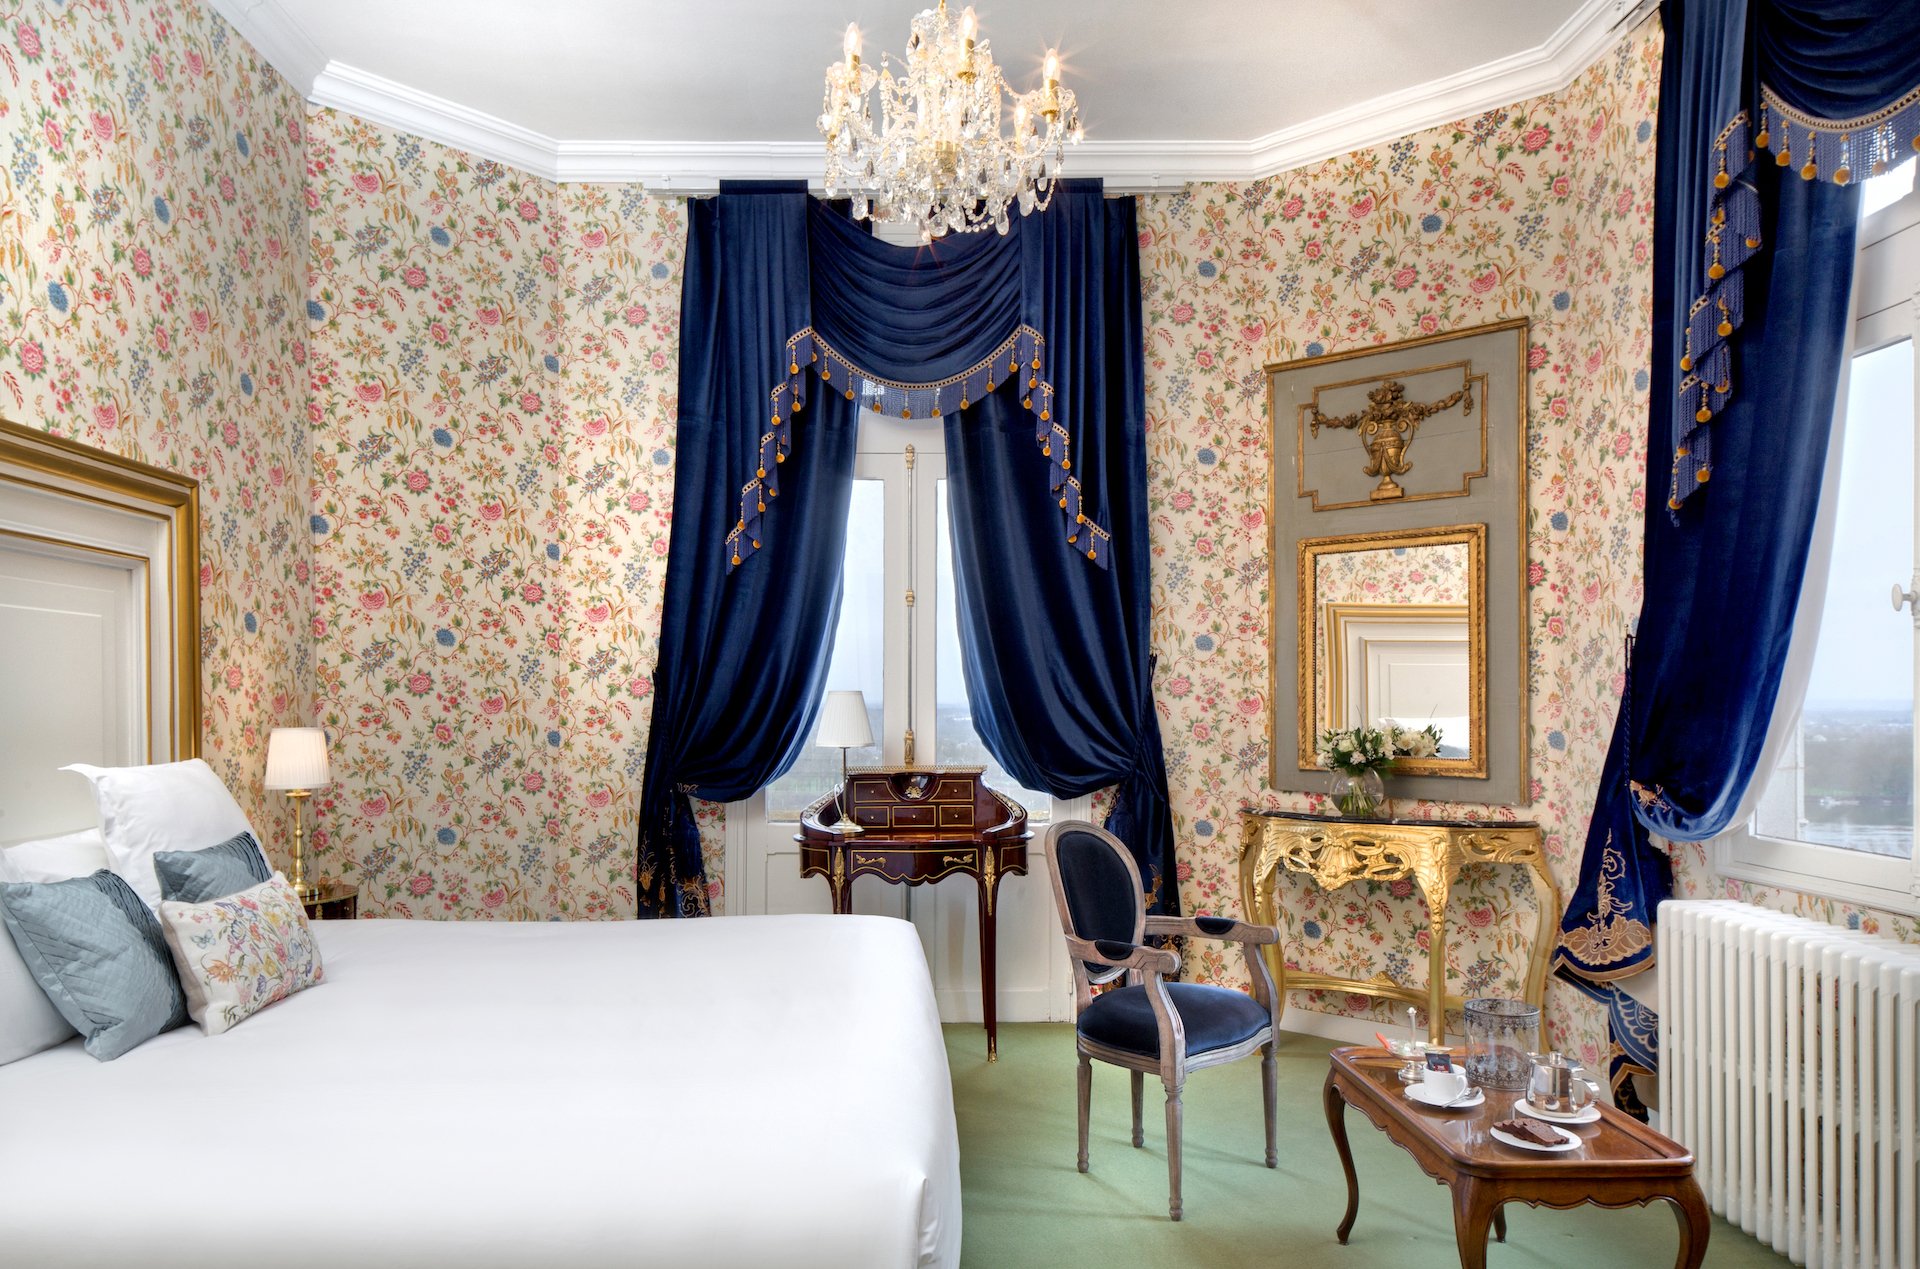 279/Chateau_le_Prieure/Chambres/Deluxe/chambre_Deluxe_2.jpg